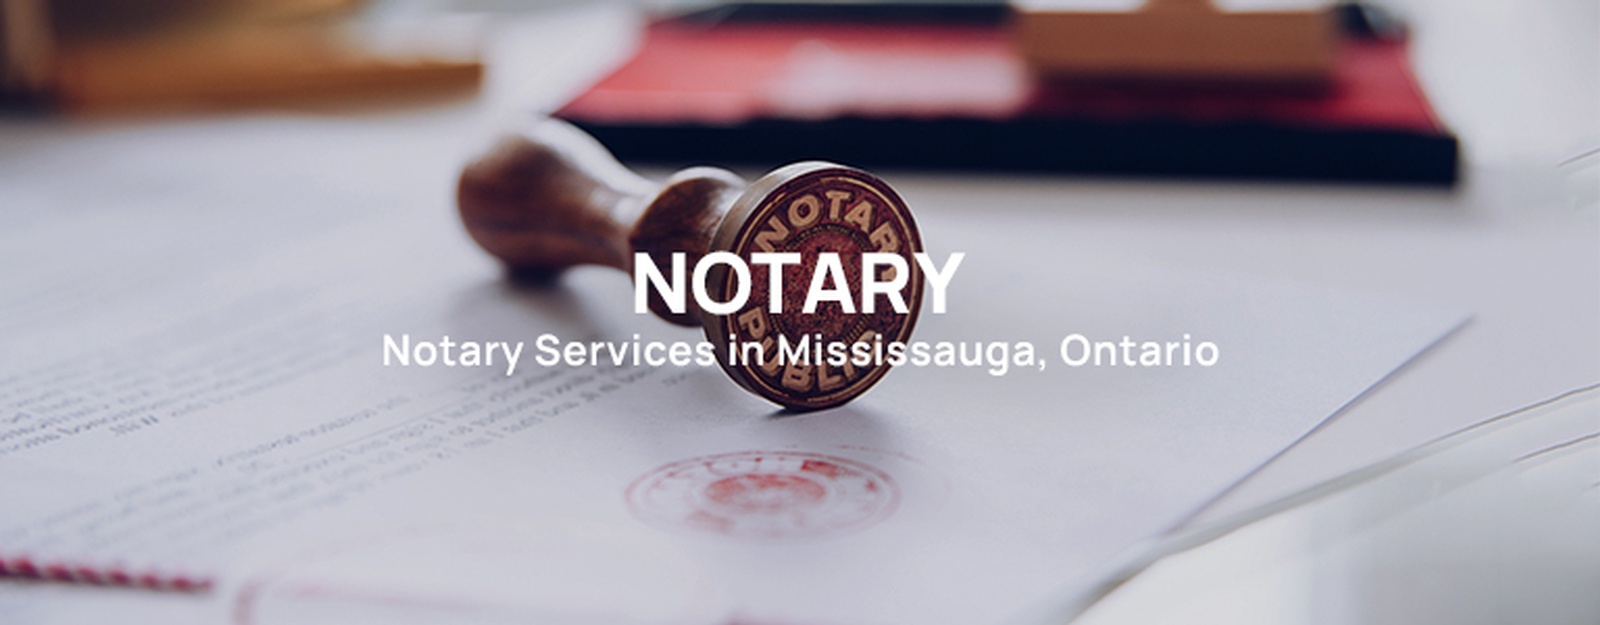 Mississauga Notary Services | Barristers in Mississauga, Ontario